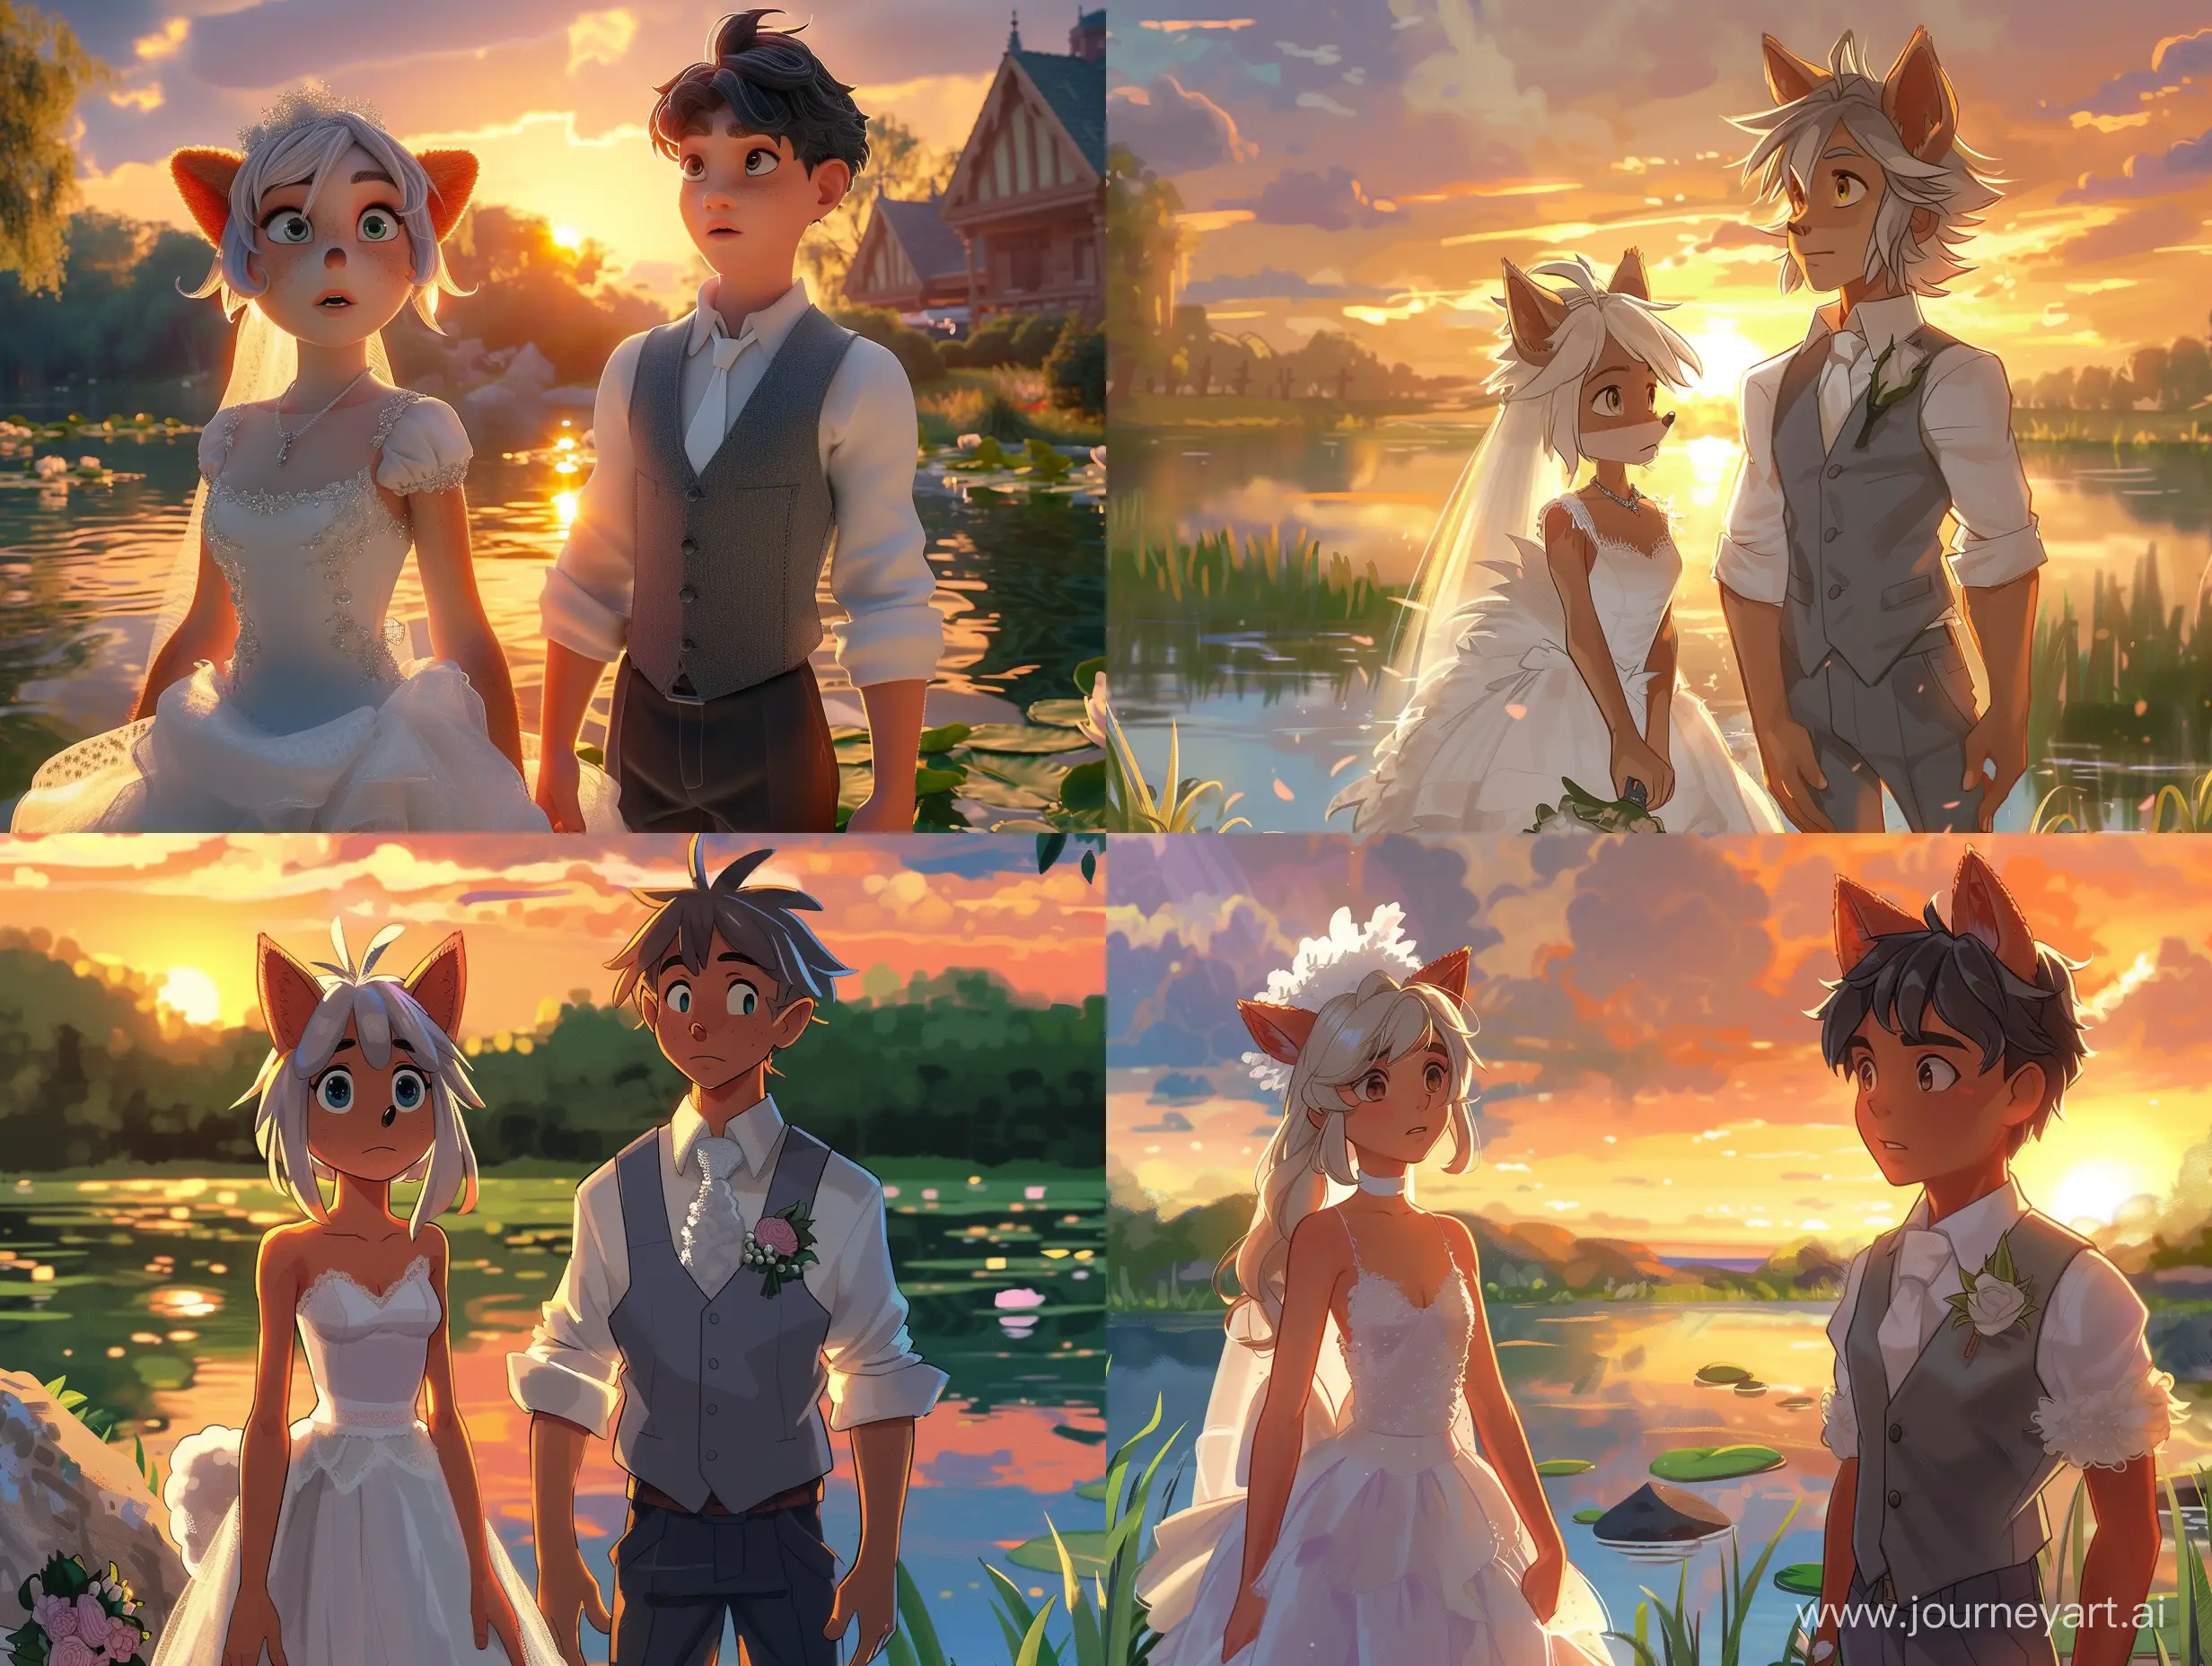 Romantic-Sunset-Stroll-Coco-Bandicoot-and-Companion-by-the-Pond